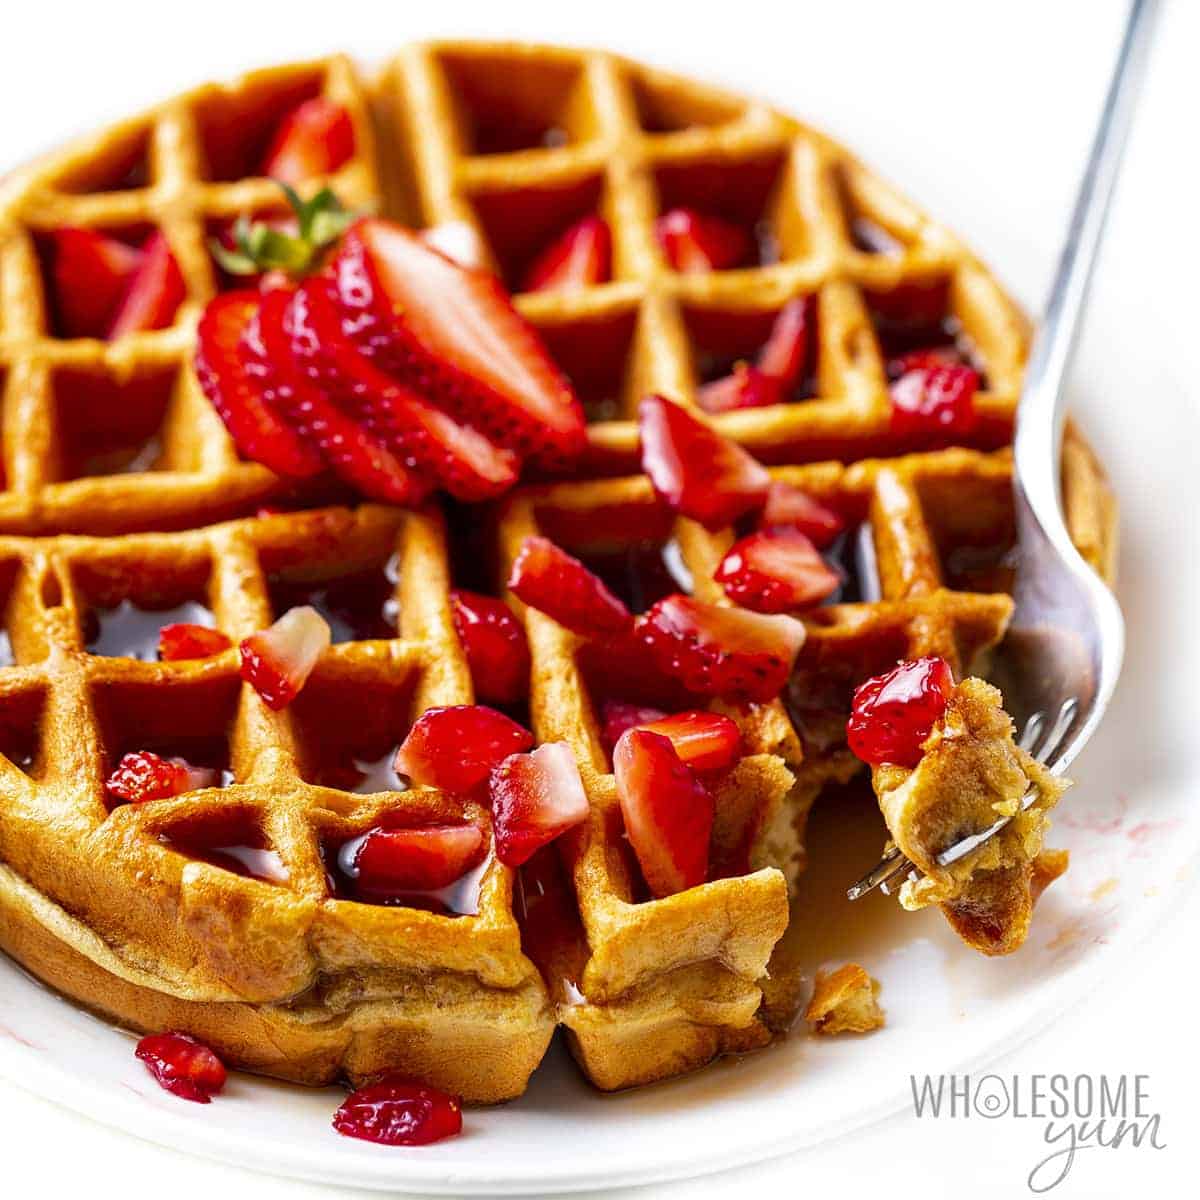 Protein waffle recipe shown with strawberries and a fork